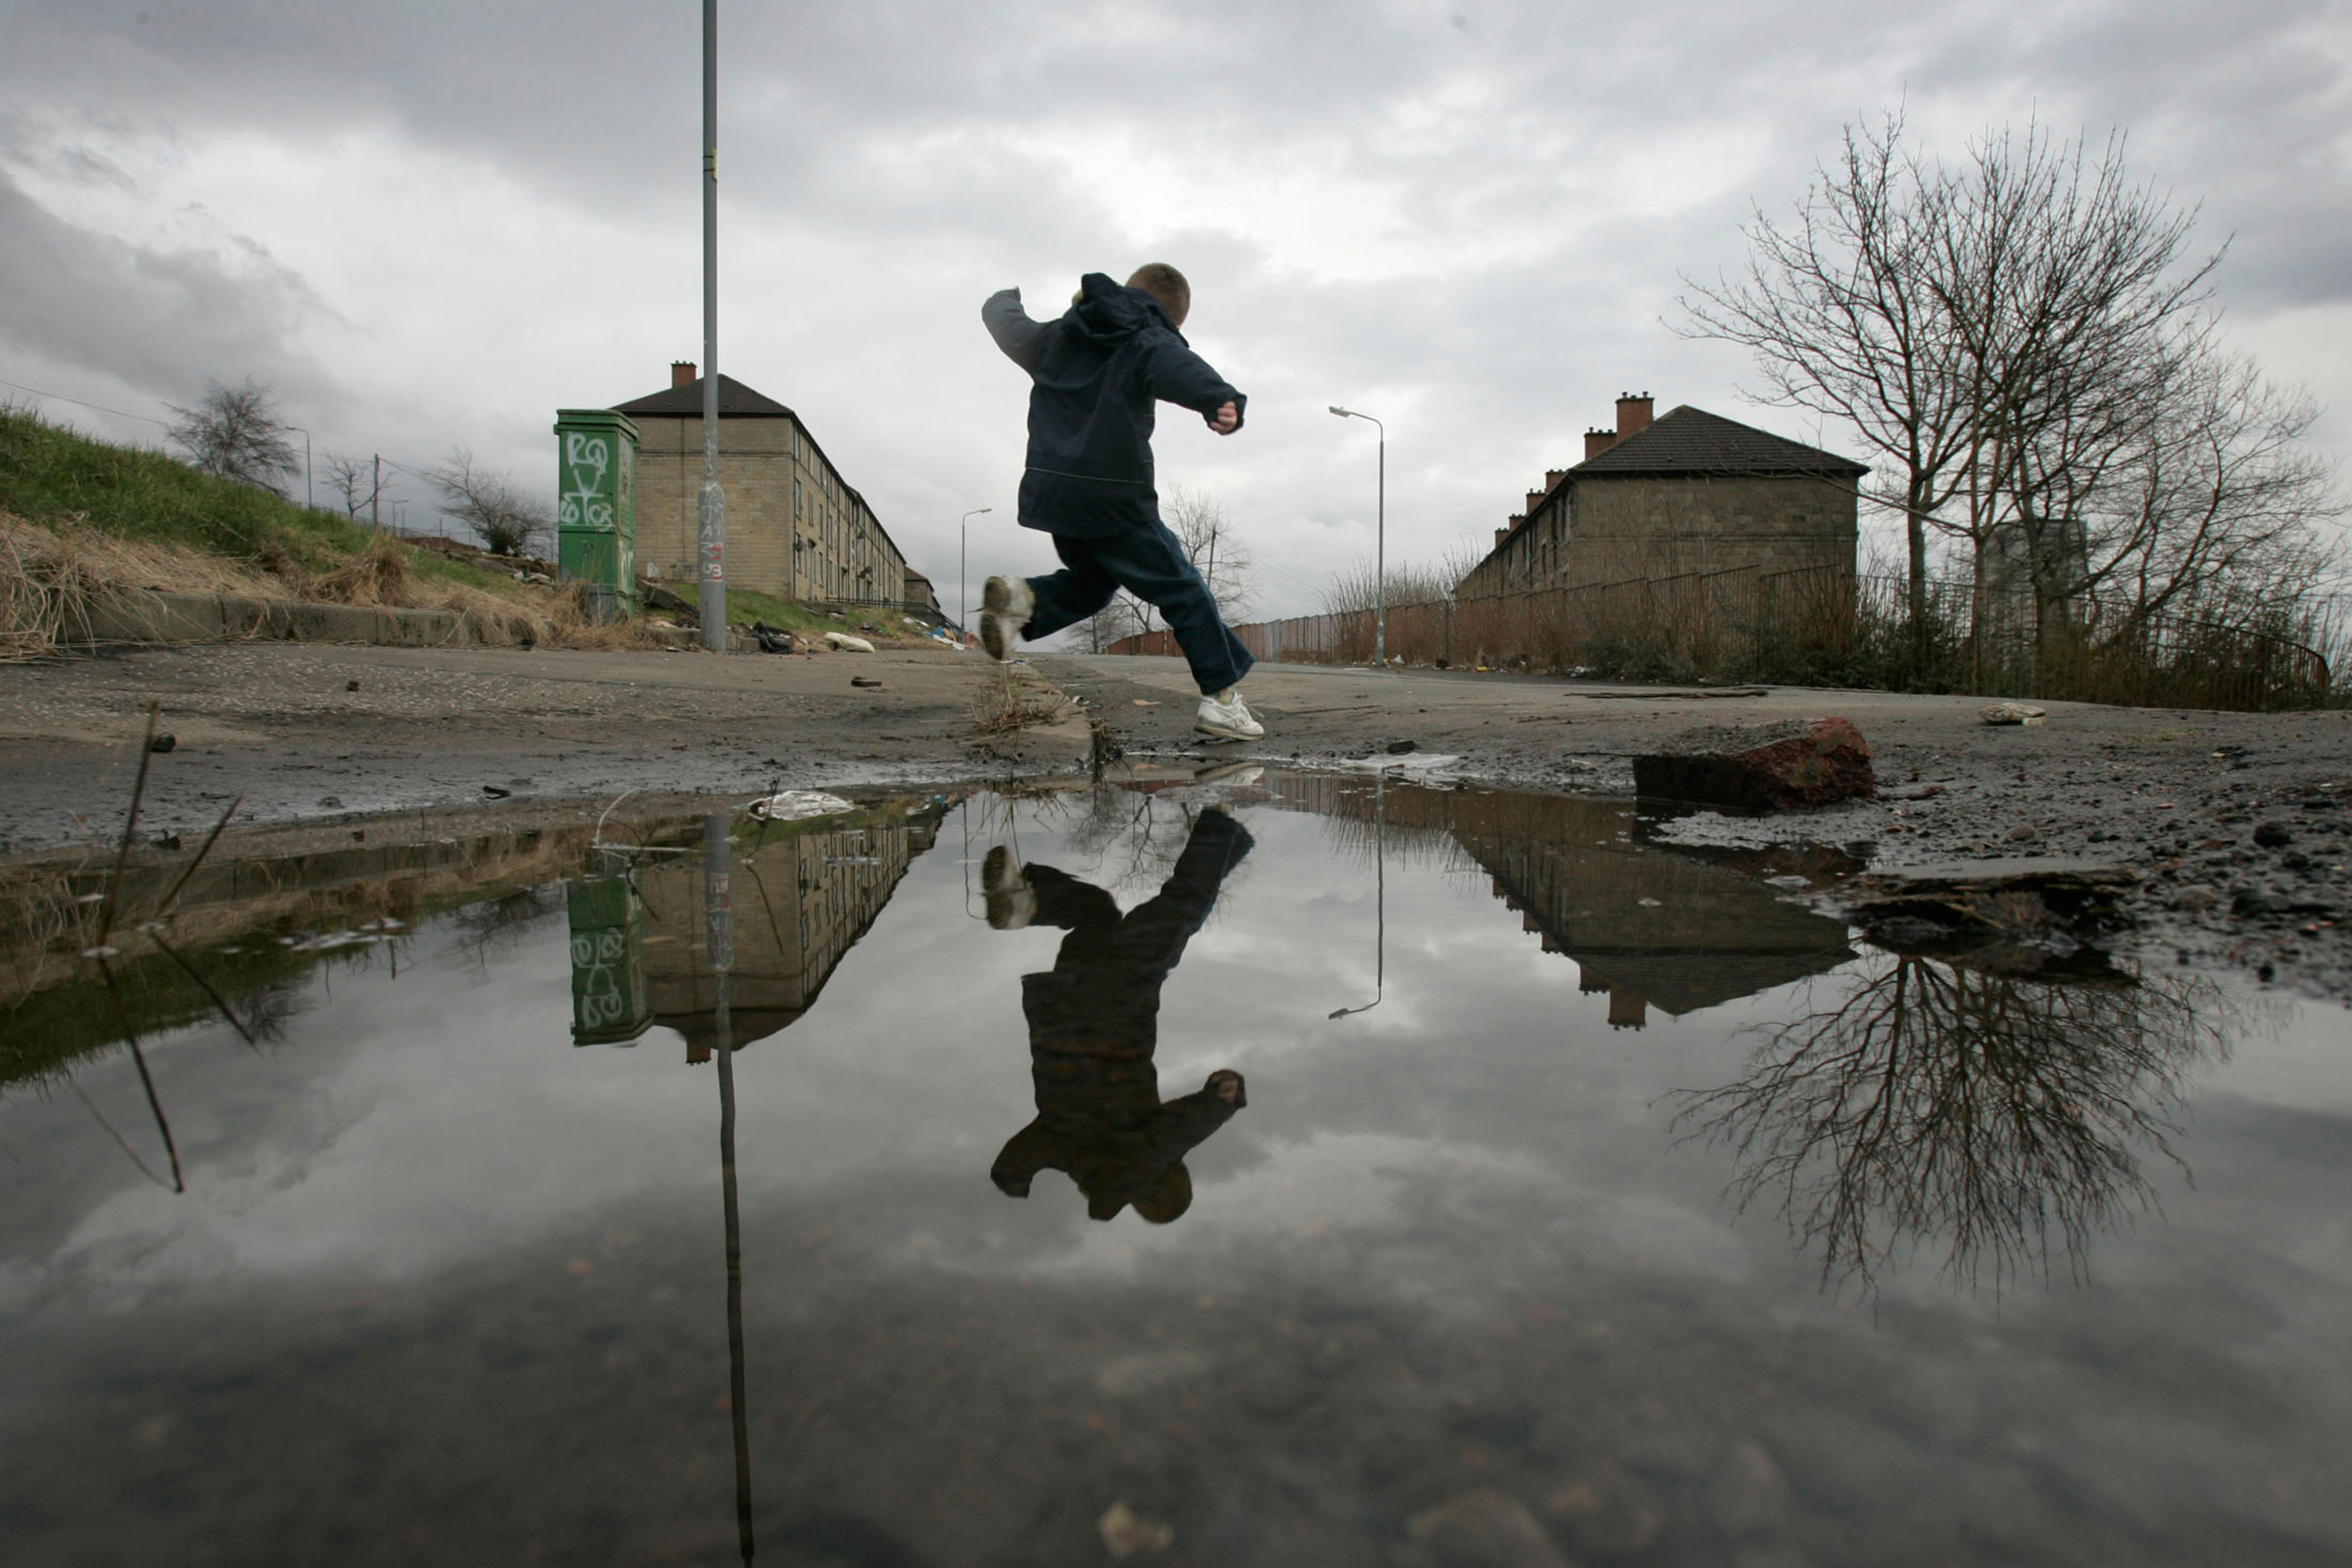 A child leaps over a puddle on a poverty stricken estate in Maryhill Glasgow